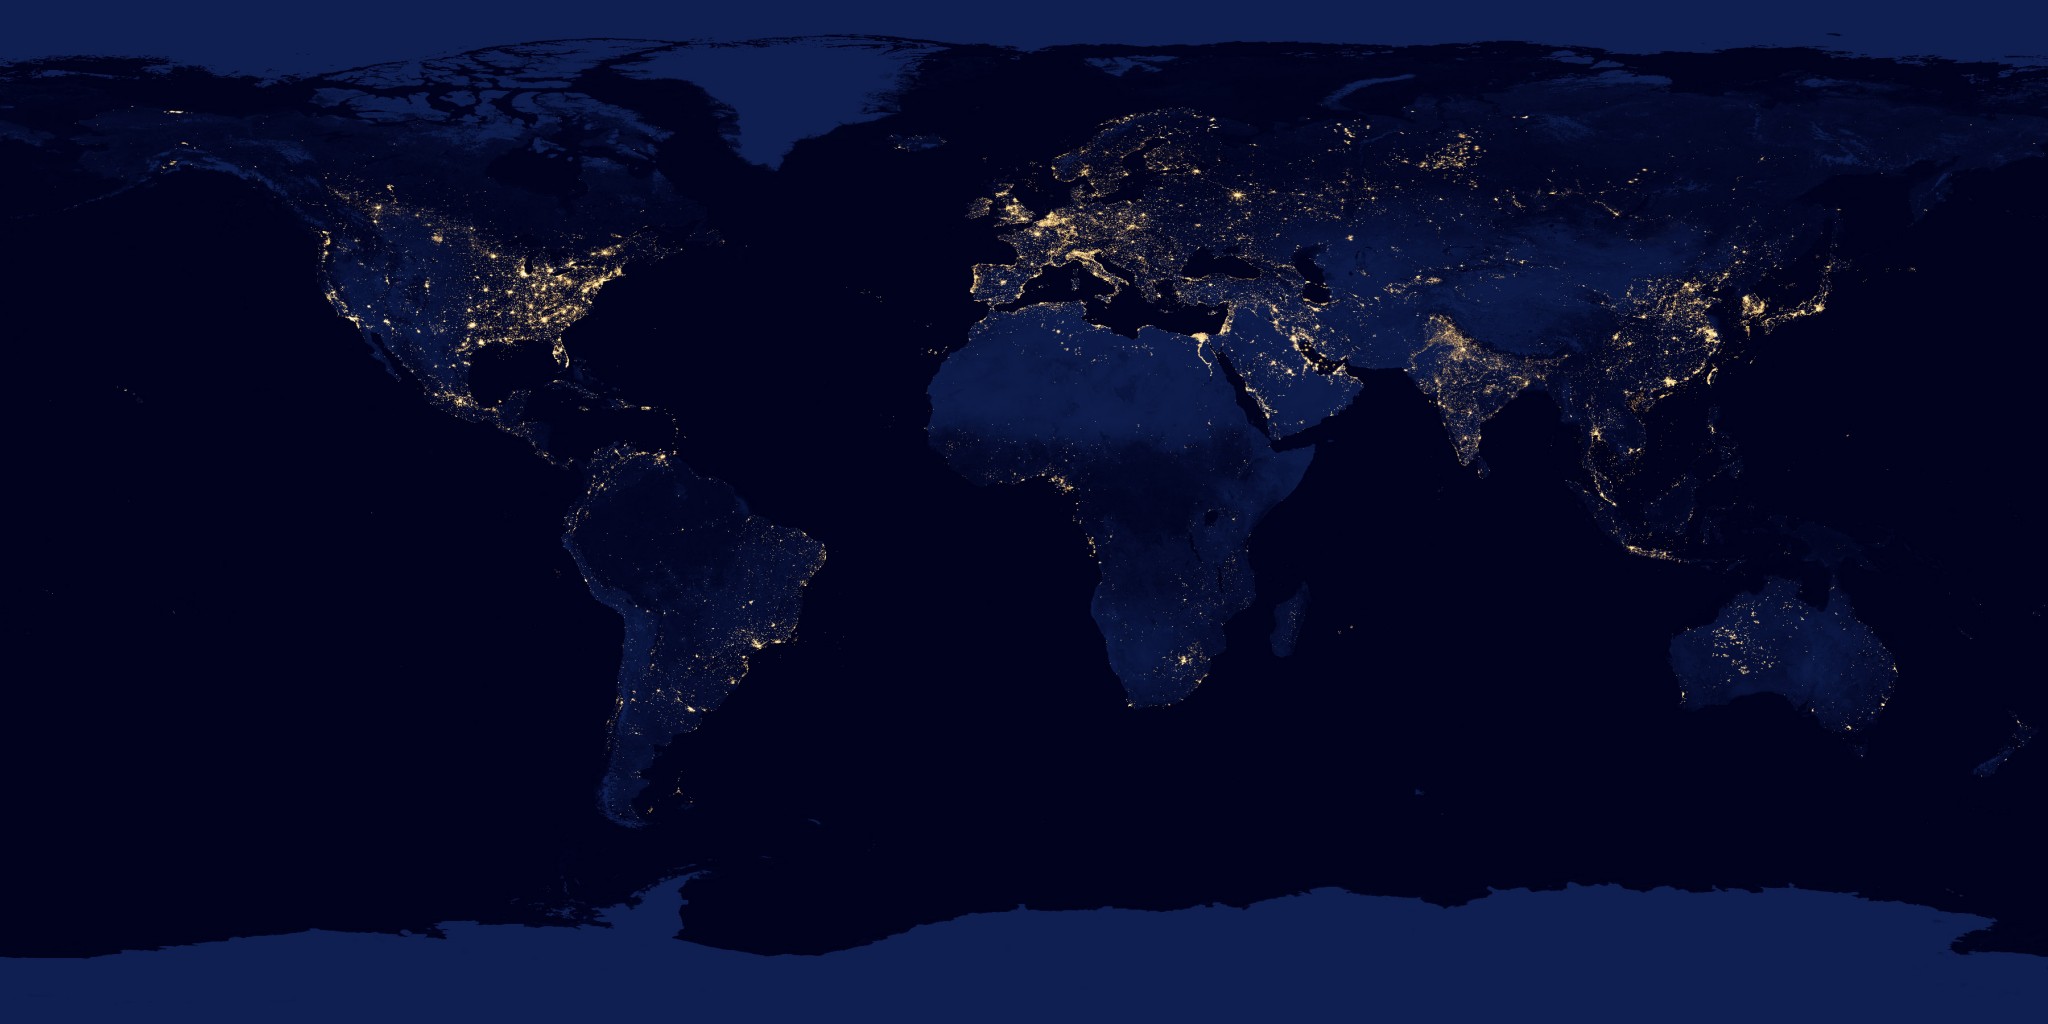 A NASA satellite image of the world's night lights conveys economic information about developed and developing countries.